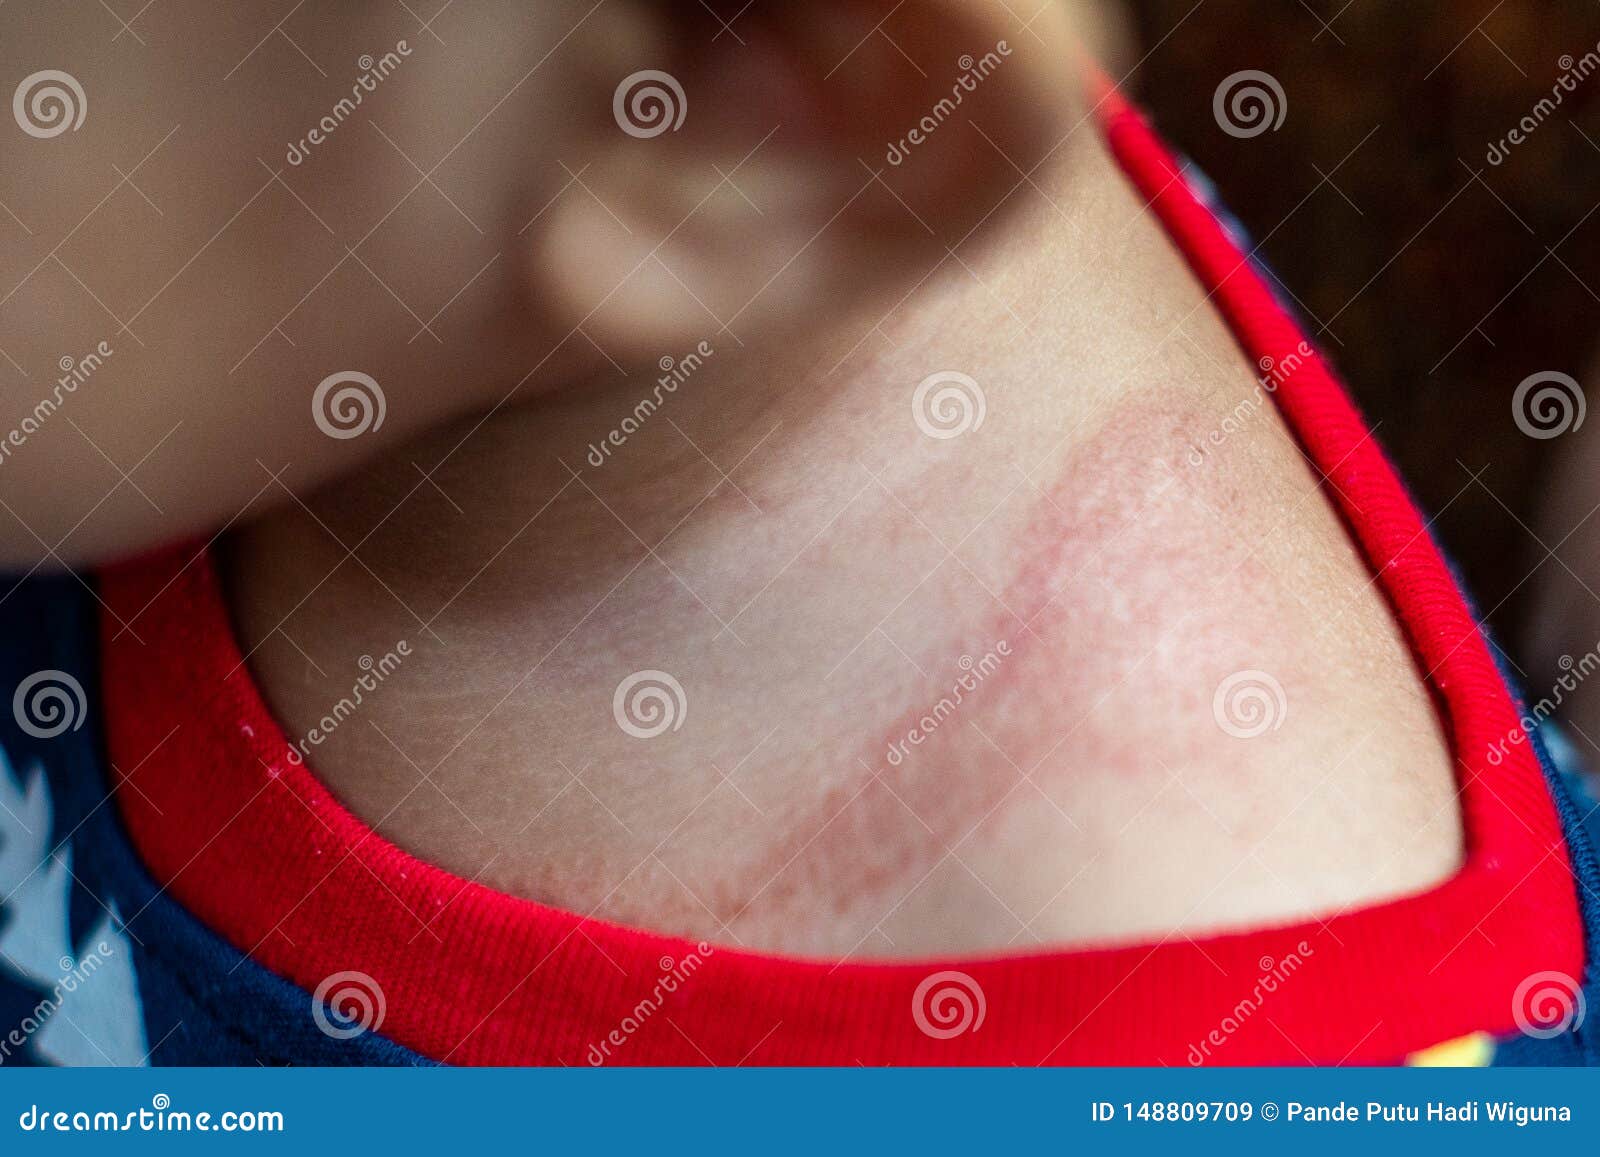 eczema can show up as red, crusty patches on your baby`s skin, often during their first few months. itÃ¢â¬â¢s common and very